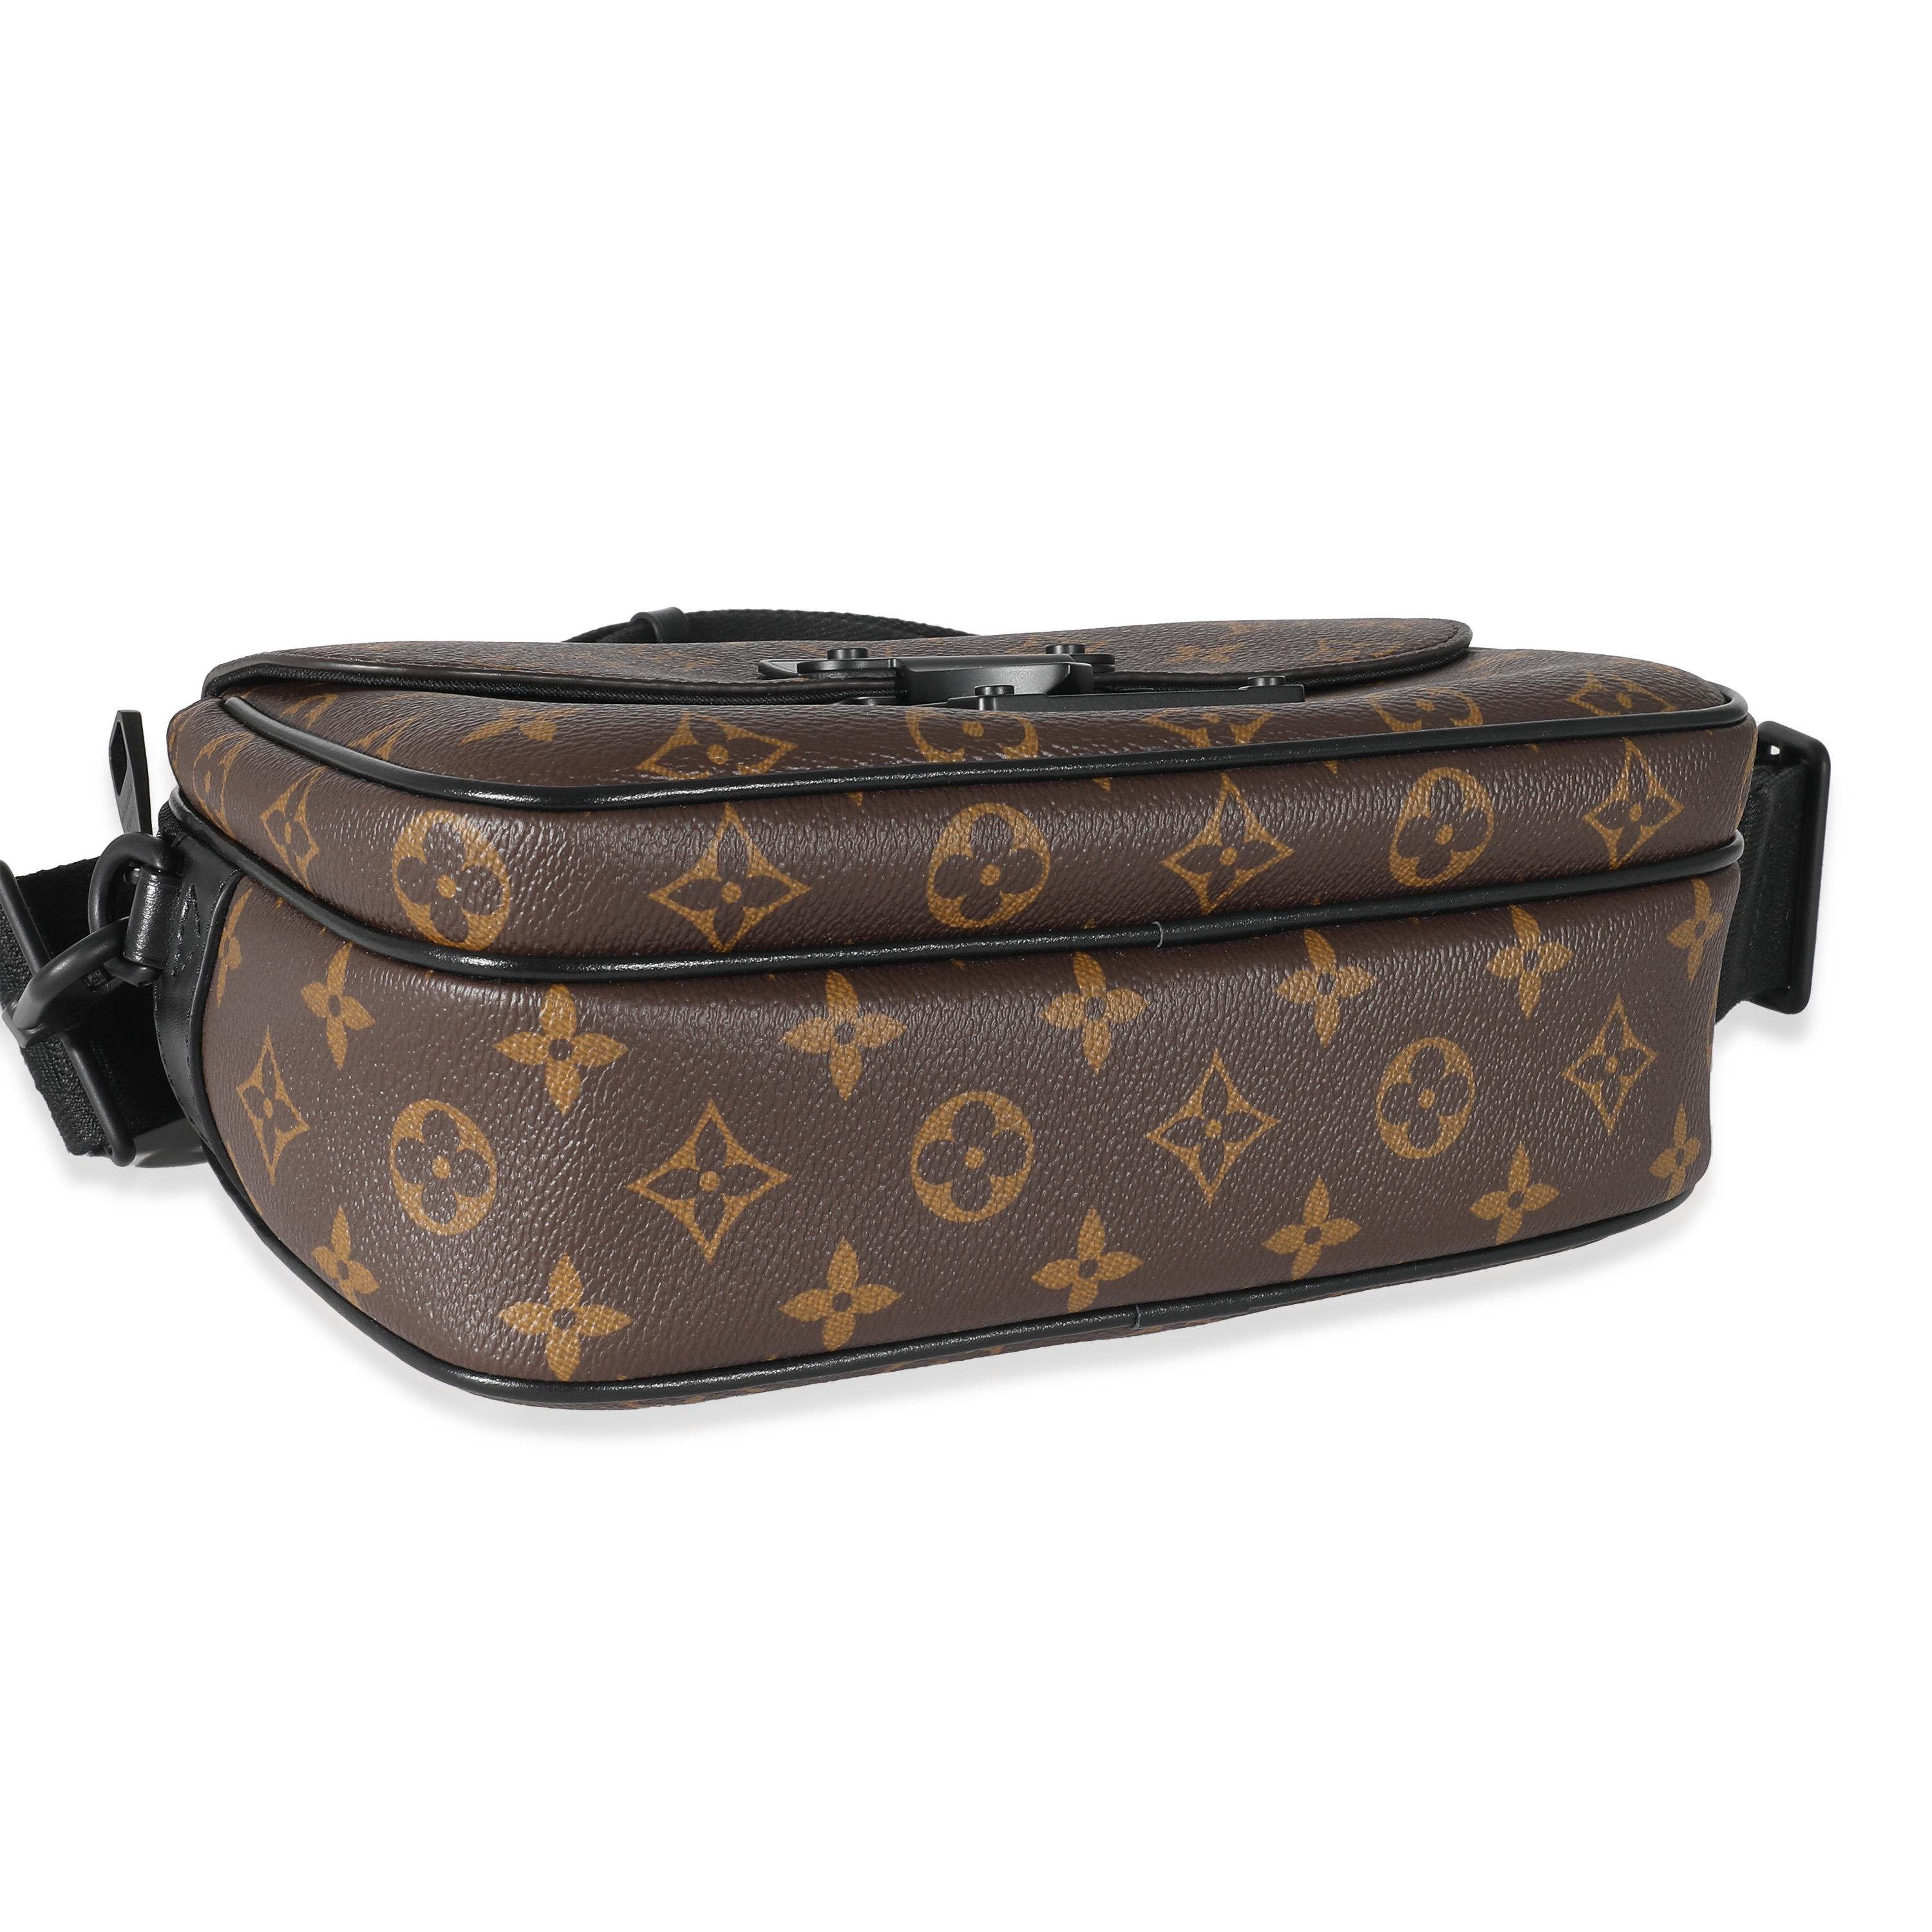 Listing Title: Louis Vuitton Monogram Macassar Canvas S Lock Messenger
SKU: 135708
MSRP: 2910.00 USD
Condition: Pre-owned 
Handbag Condition: Excellent
Condition Comments: Item is in excellent condition and displays light signs of wear. Light